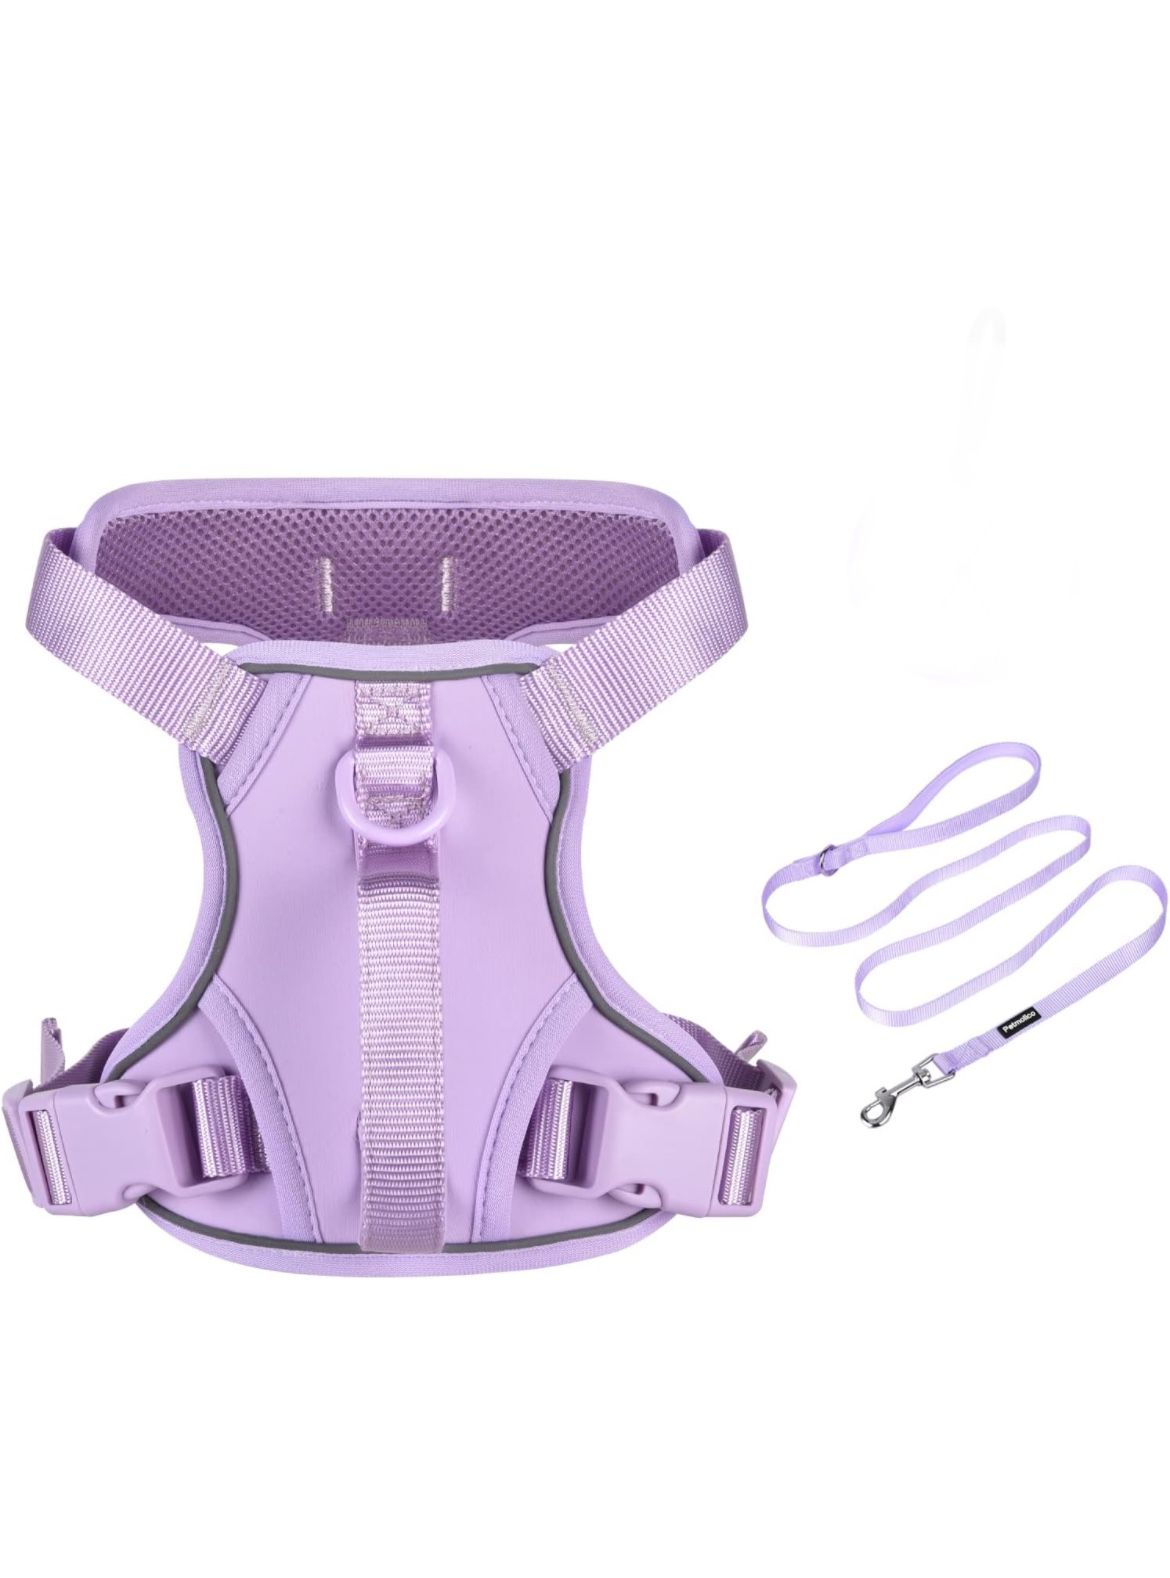 Dog Harness With matching leash, Large